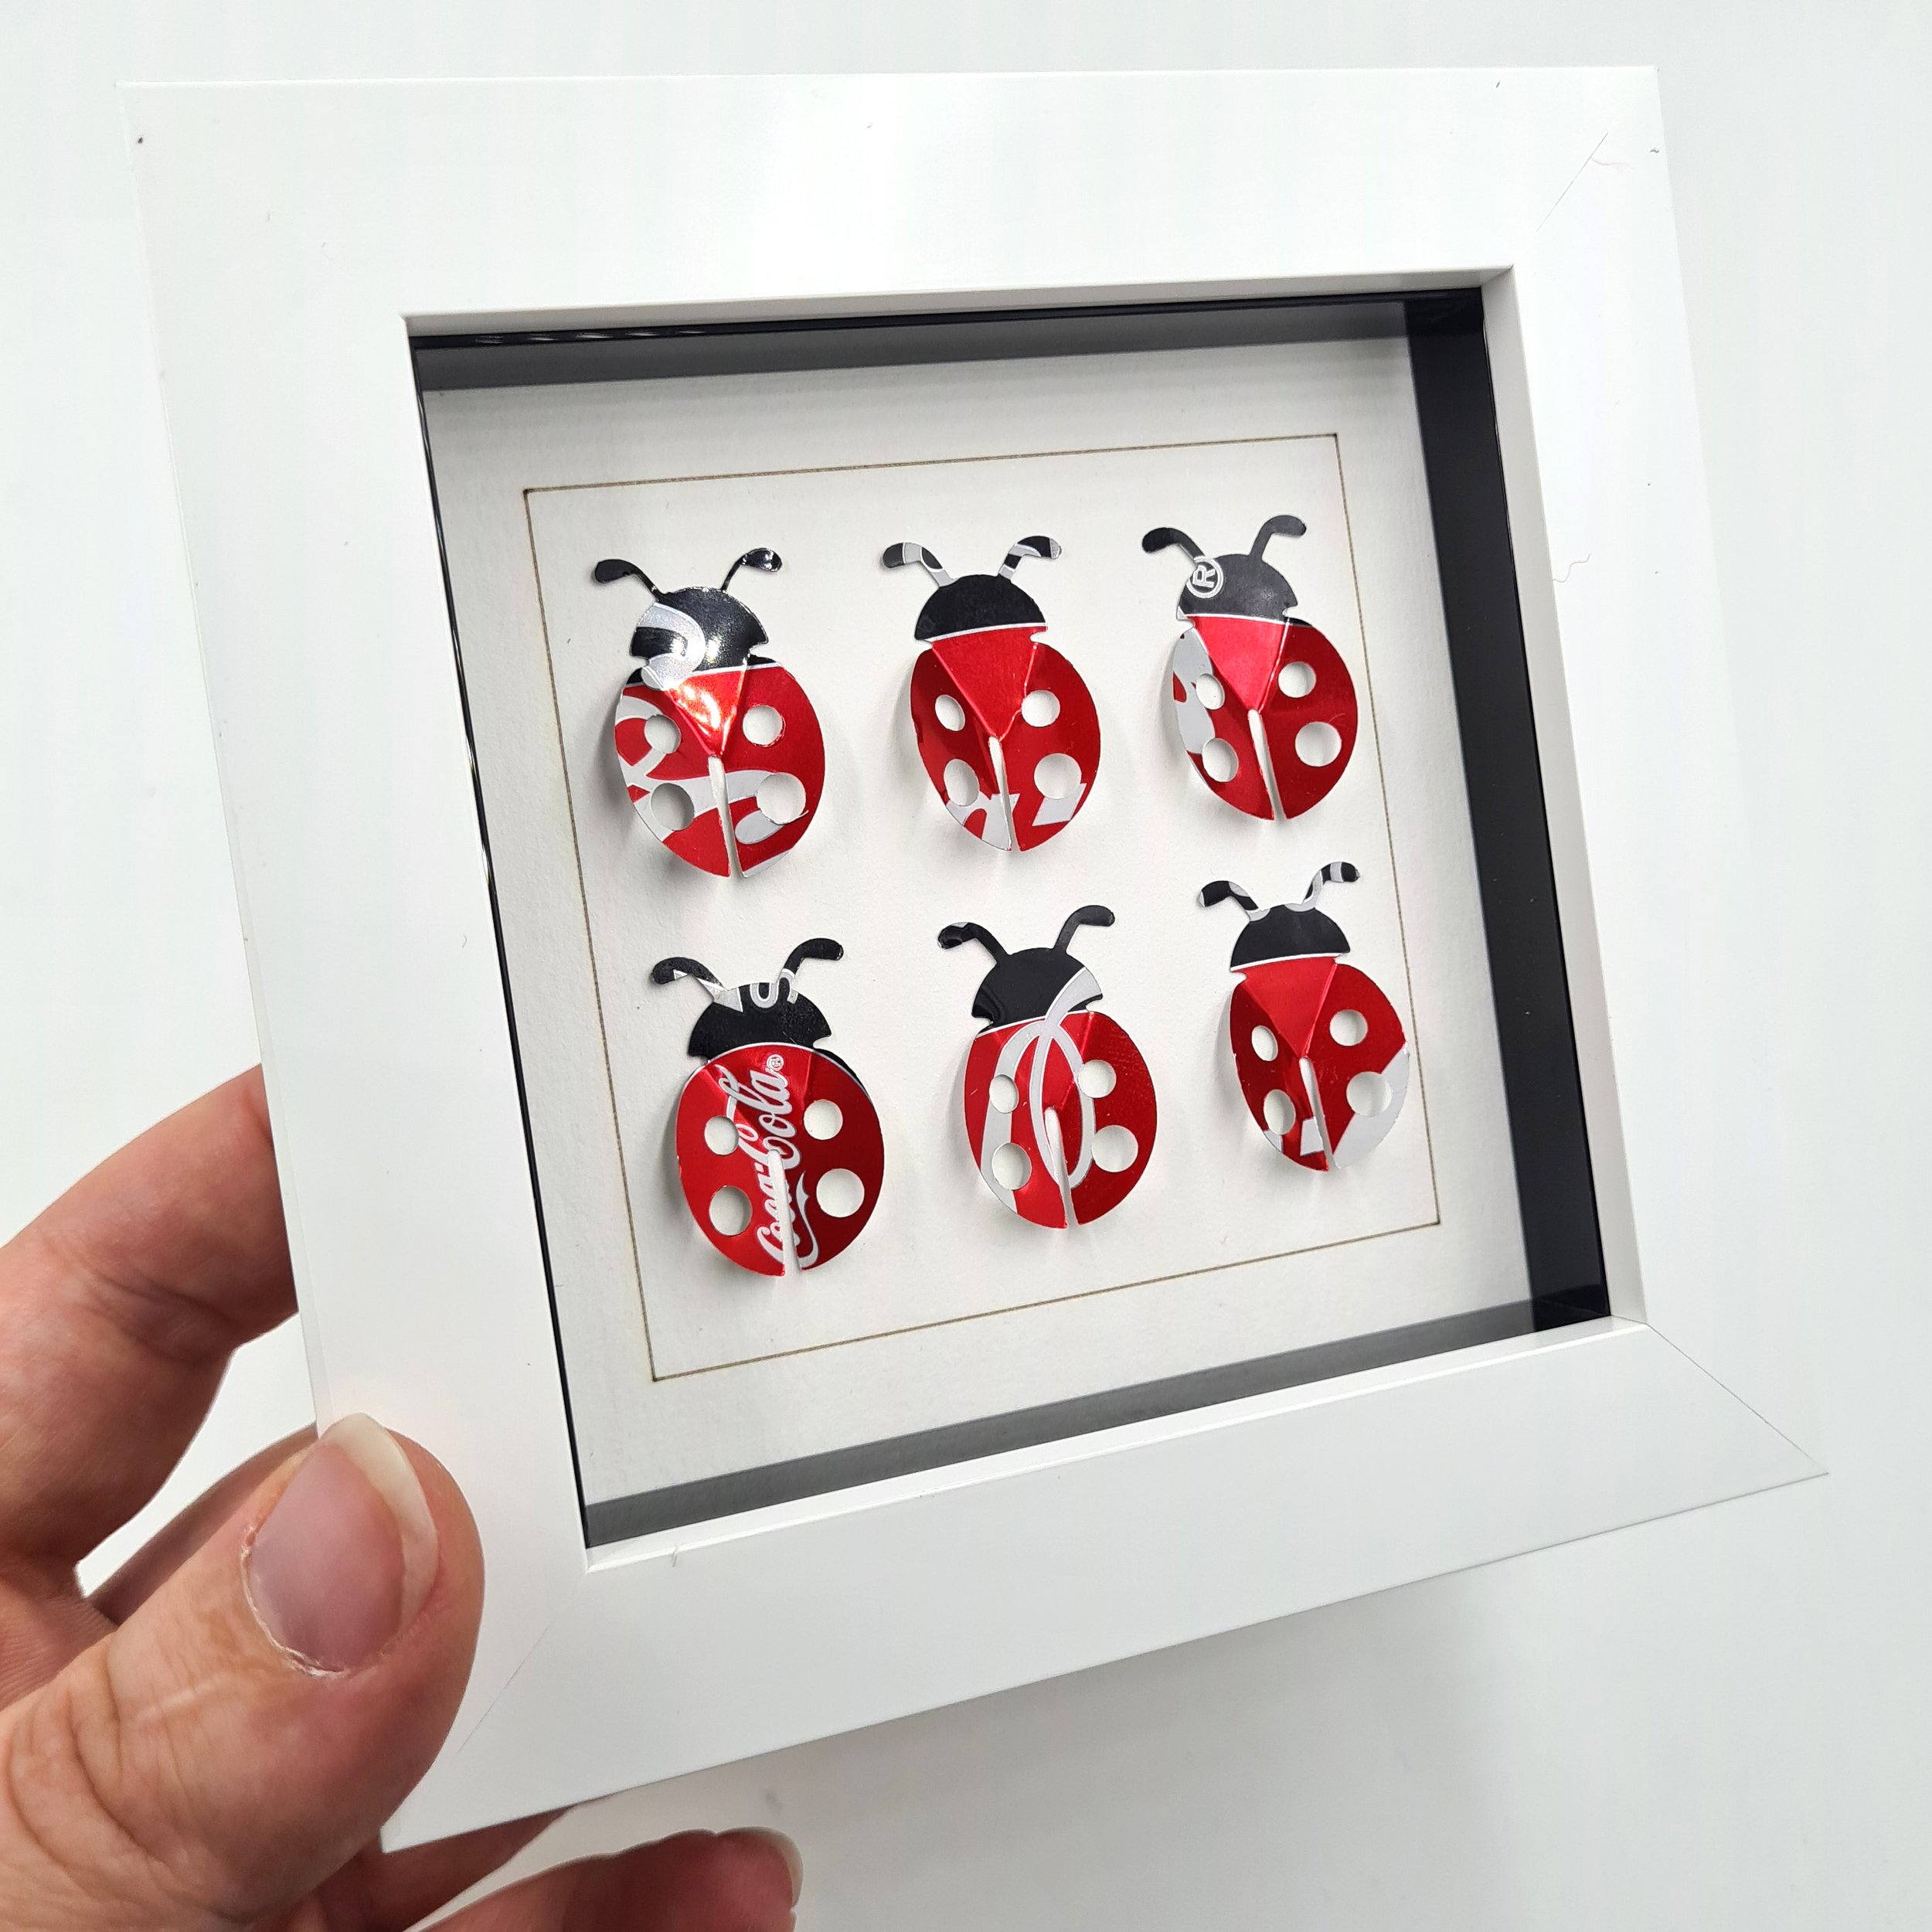 Ladybird upcycled can art white frame close up 1.jpg